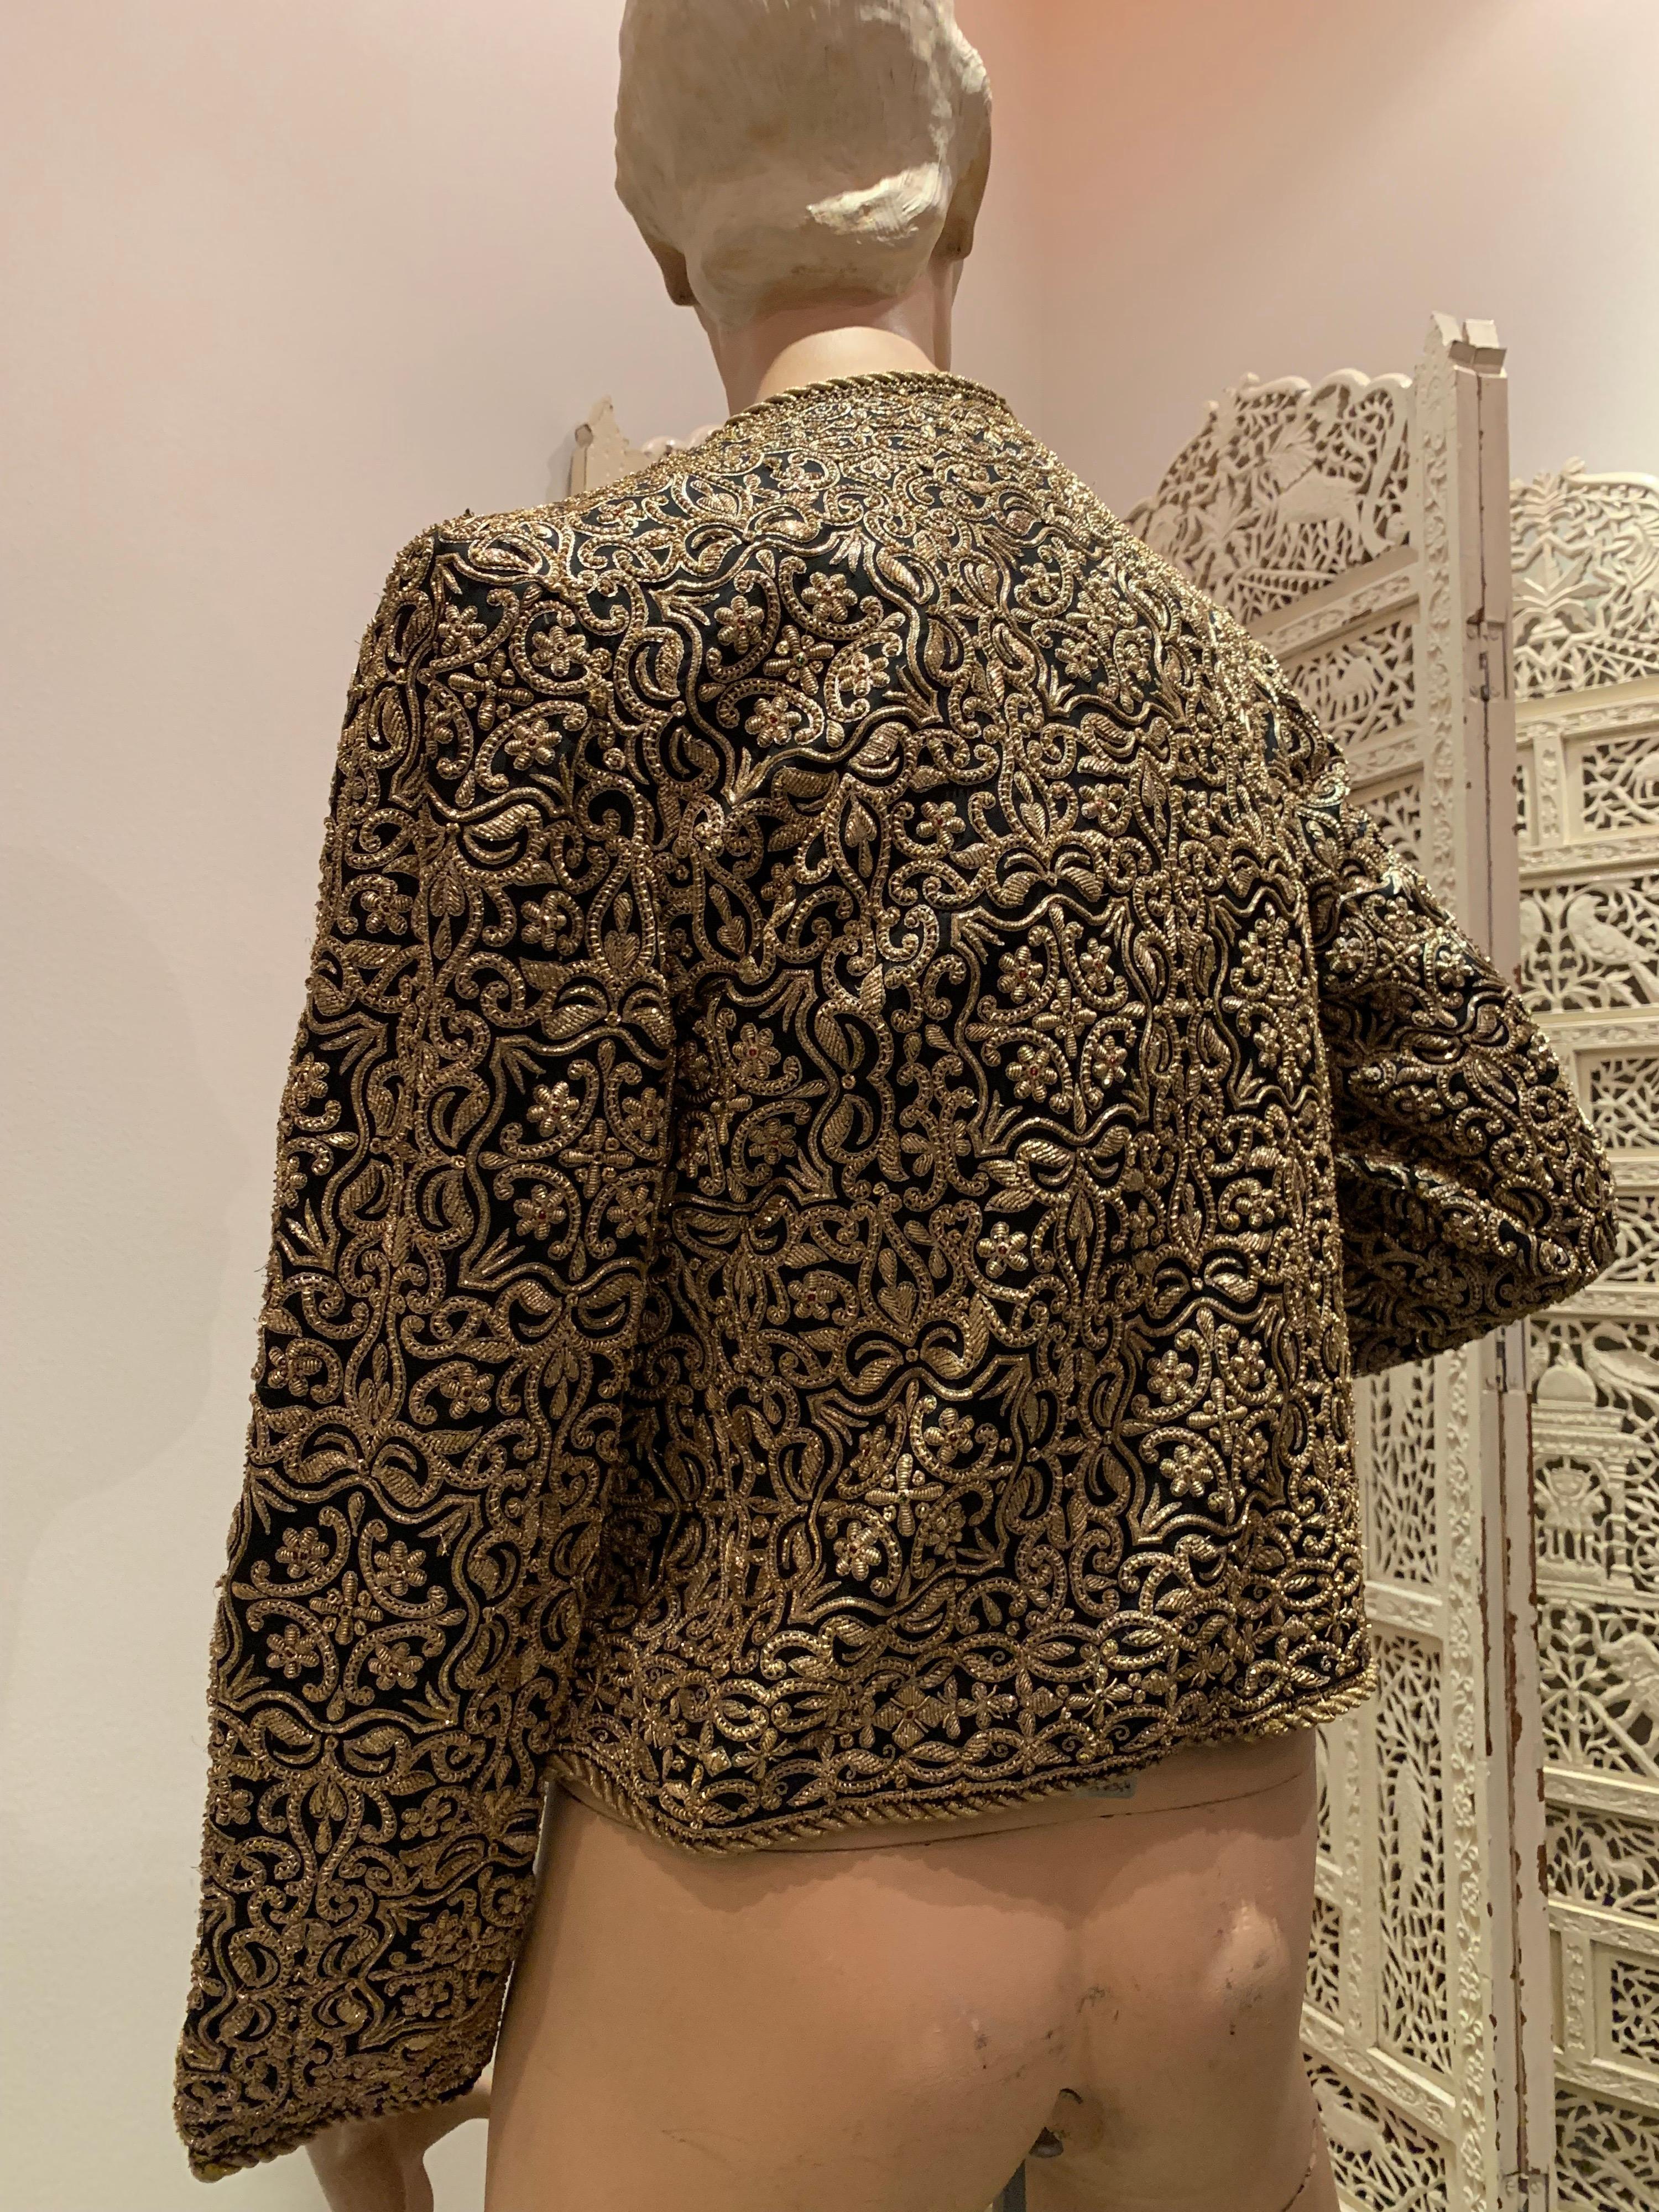 Women's 1980s  Bill Blass Evening Jacket W/ Heavily Encrusted Chain Embriodery Gold Work For Sale